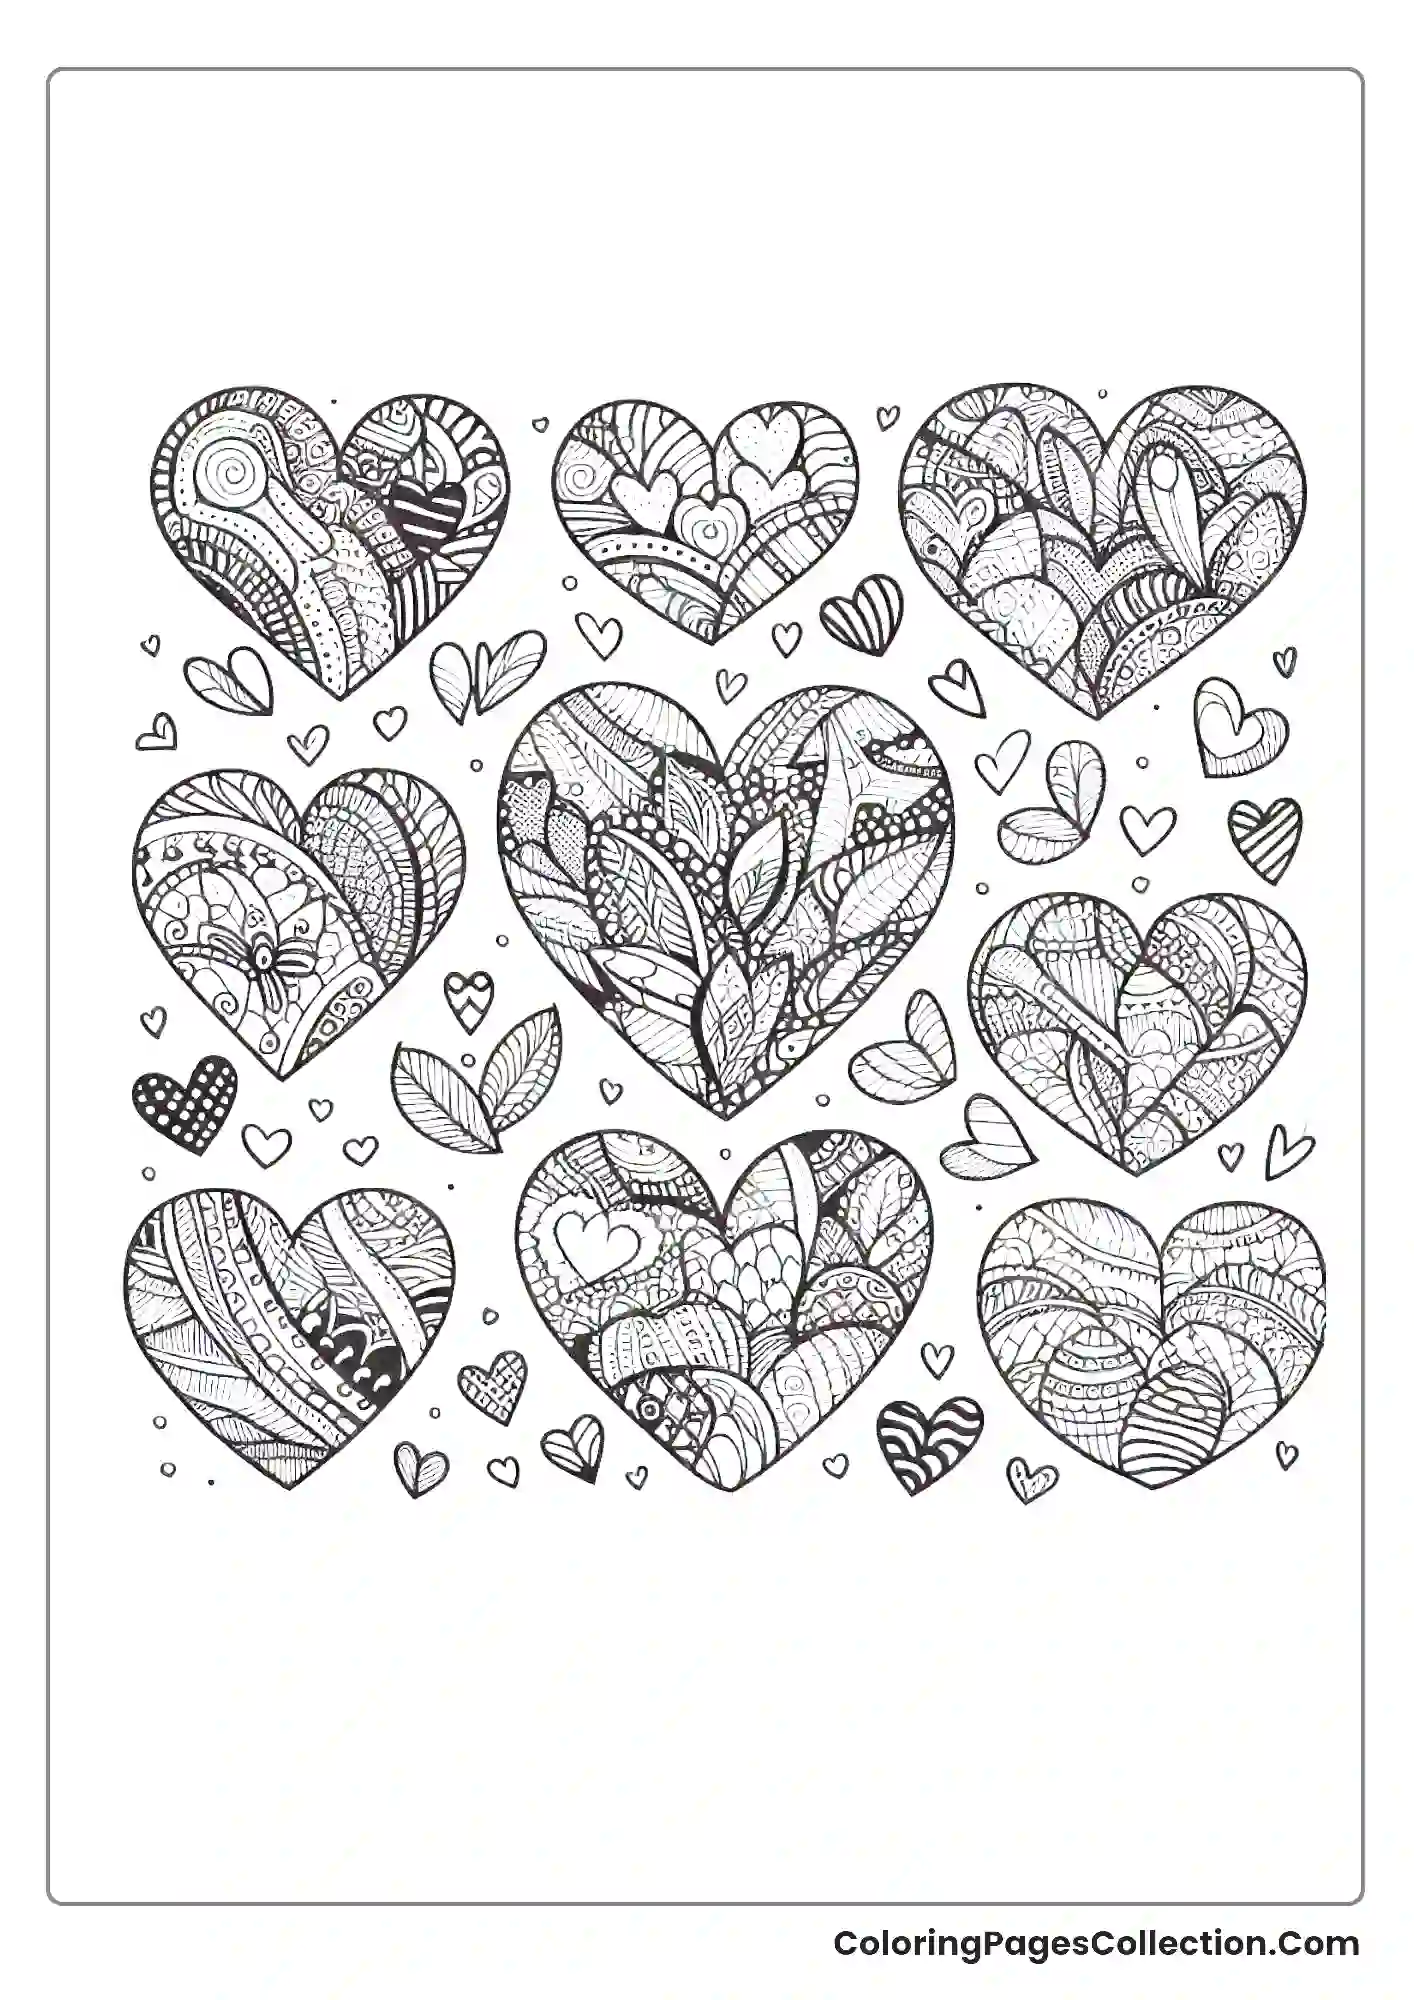 Multiple Hearts Filled With Different Doodle Patterns